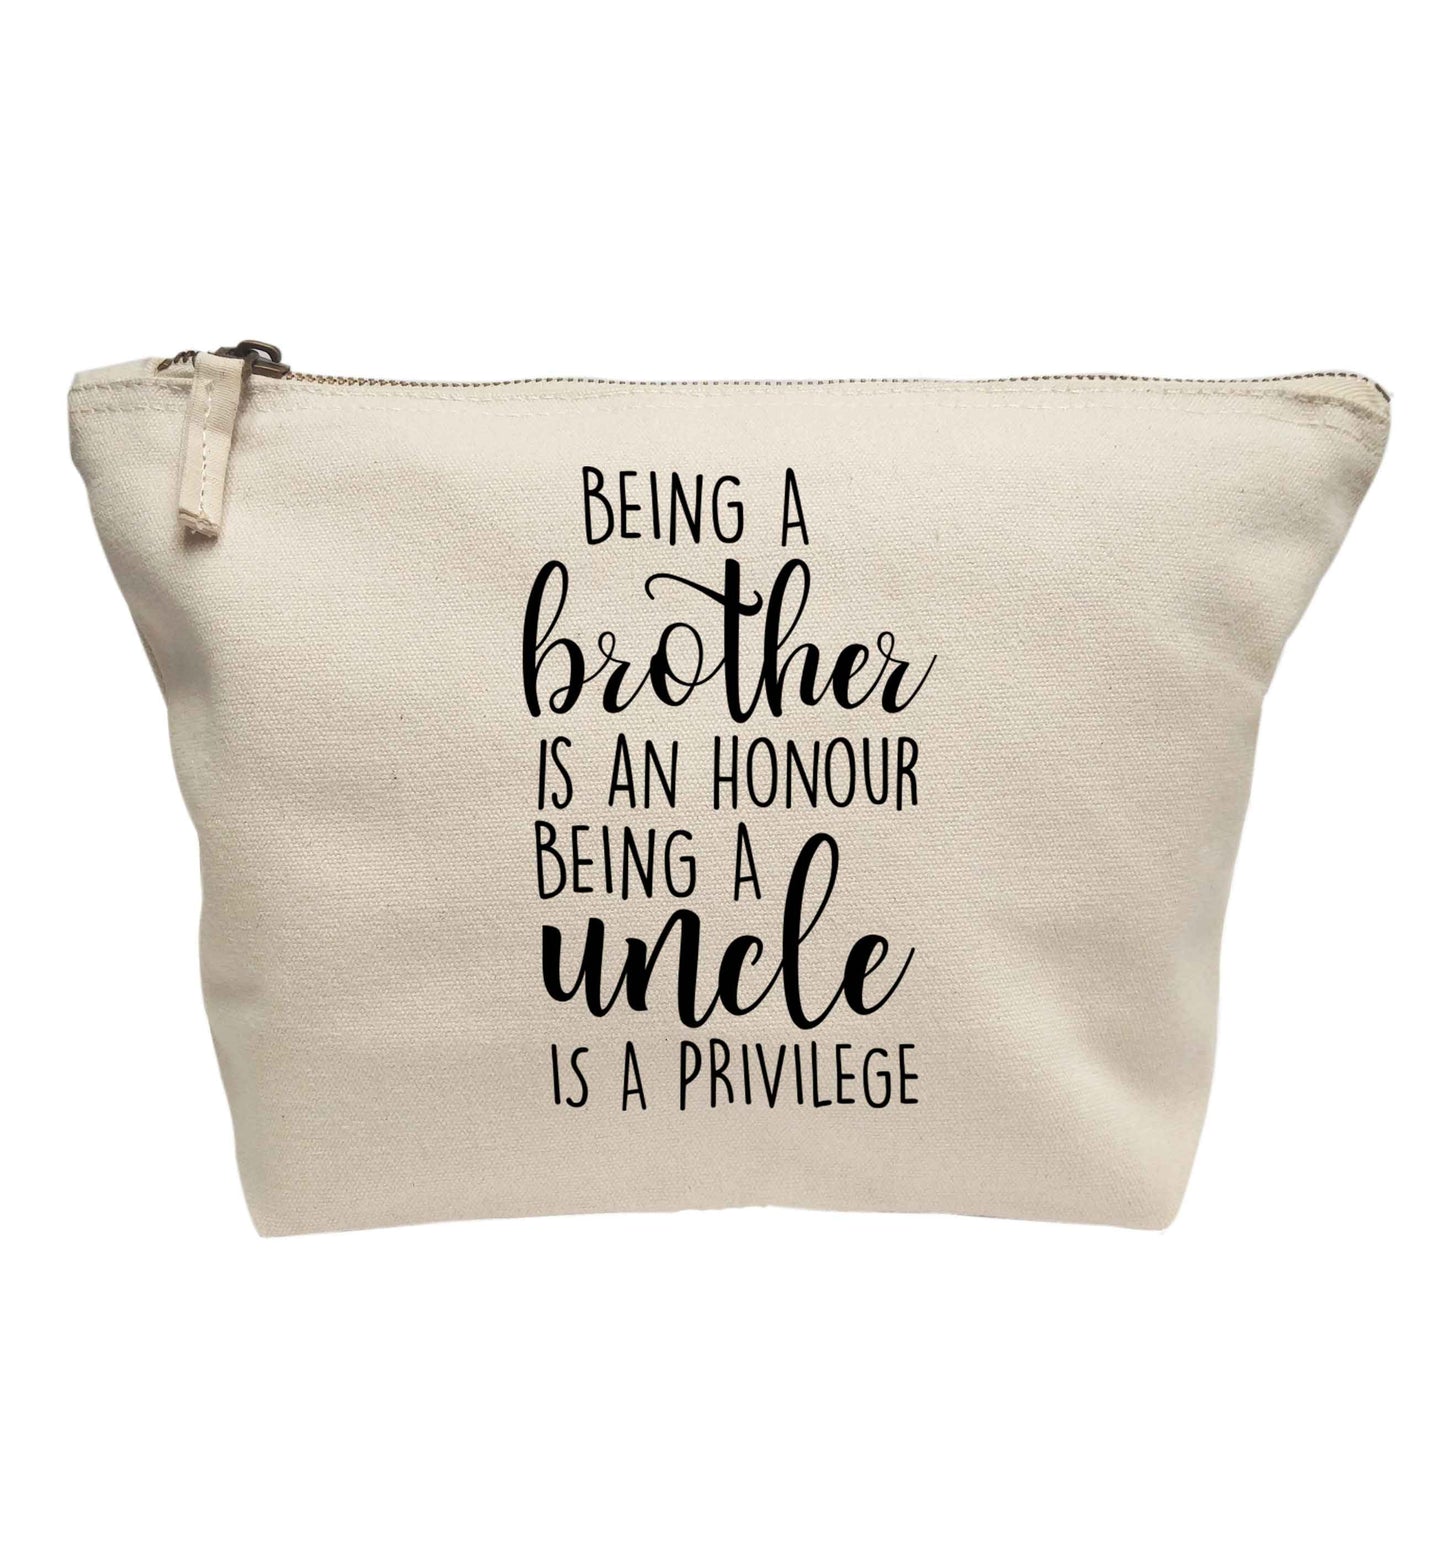 Being a brother is an honour being an uncle is a privilege | makeup / wash bag